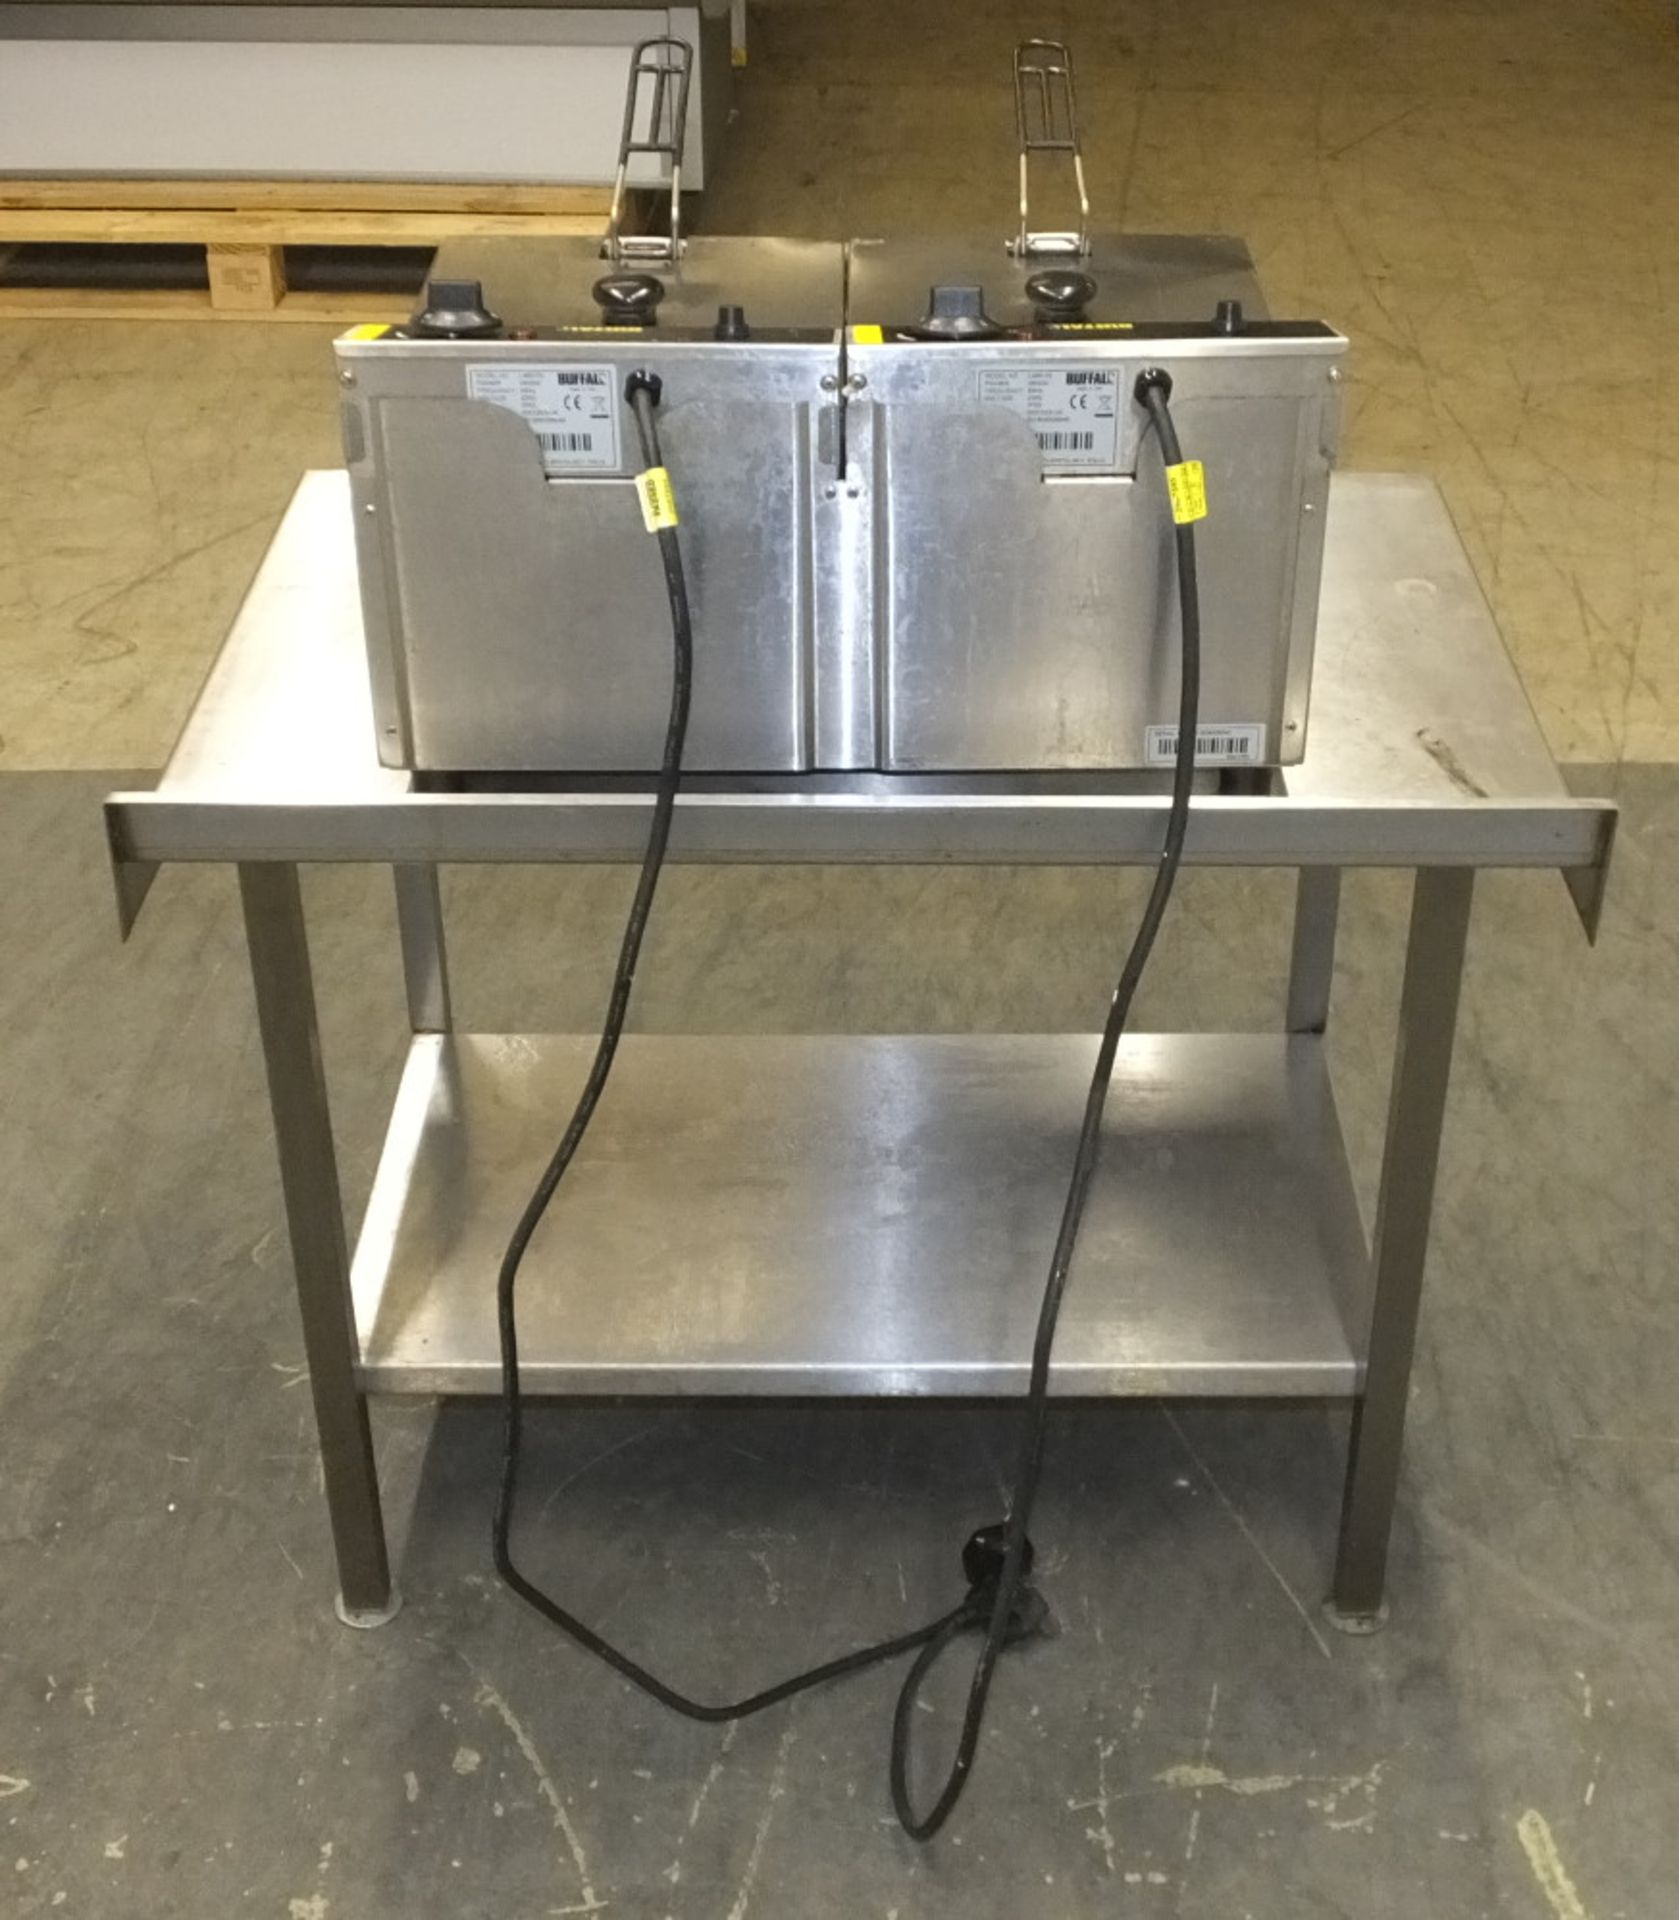 Buffalo L485-03 Double Electric Fryer on Stainless Steel Unit - L850 x D600 x H630mm (dime - Image 7 of 8